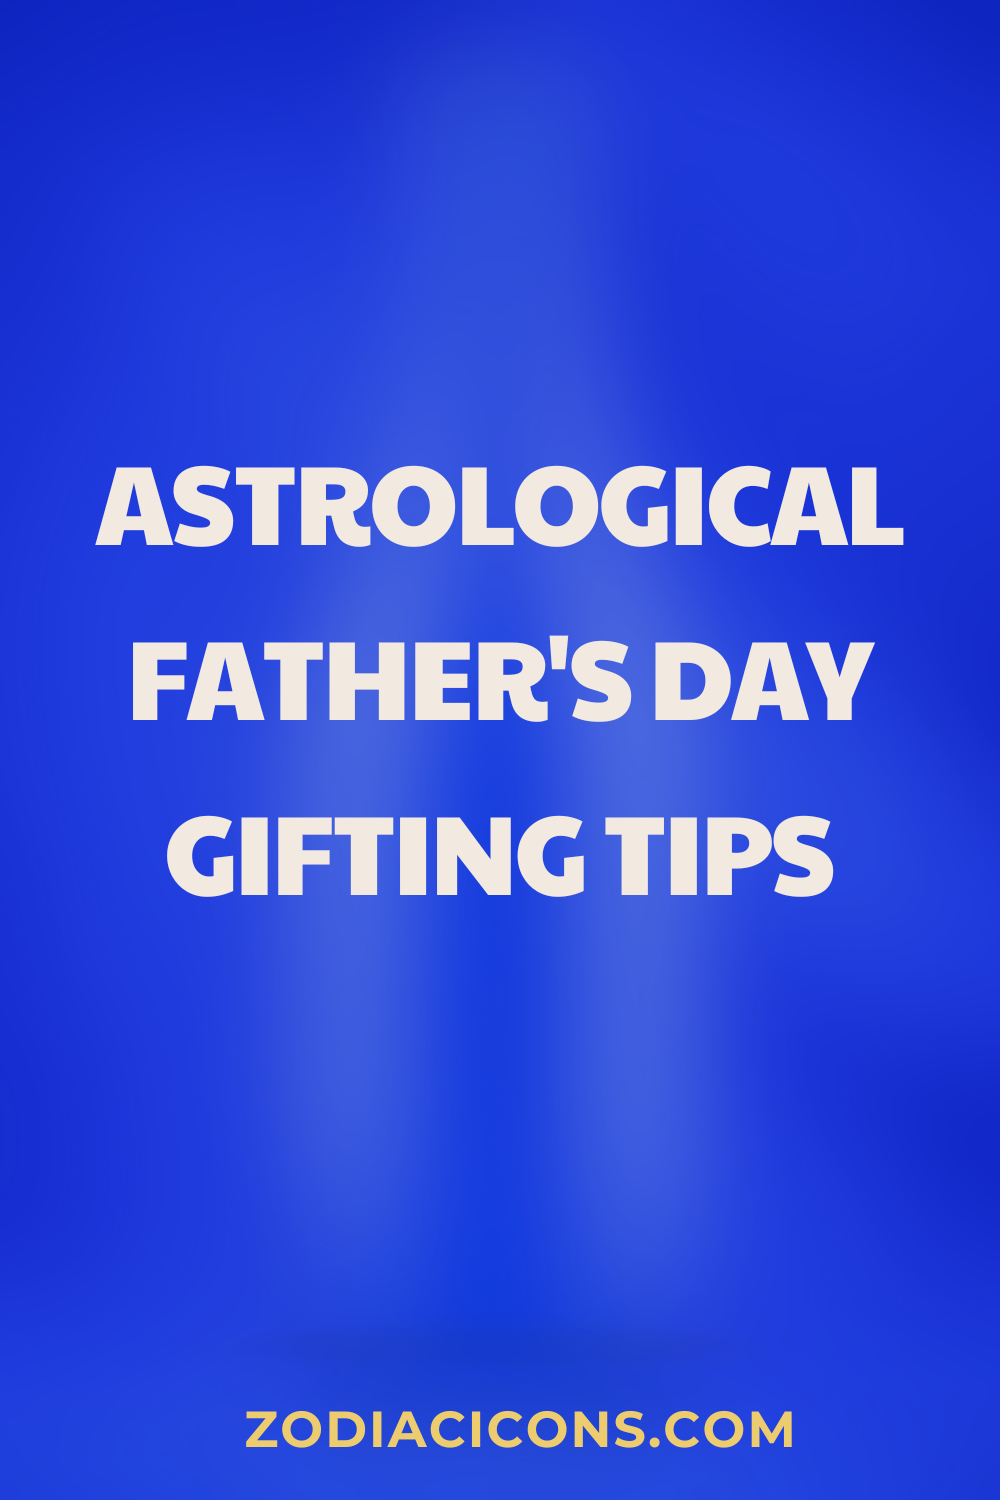 Astrological Father's Day Gifting Tips